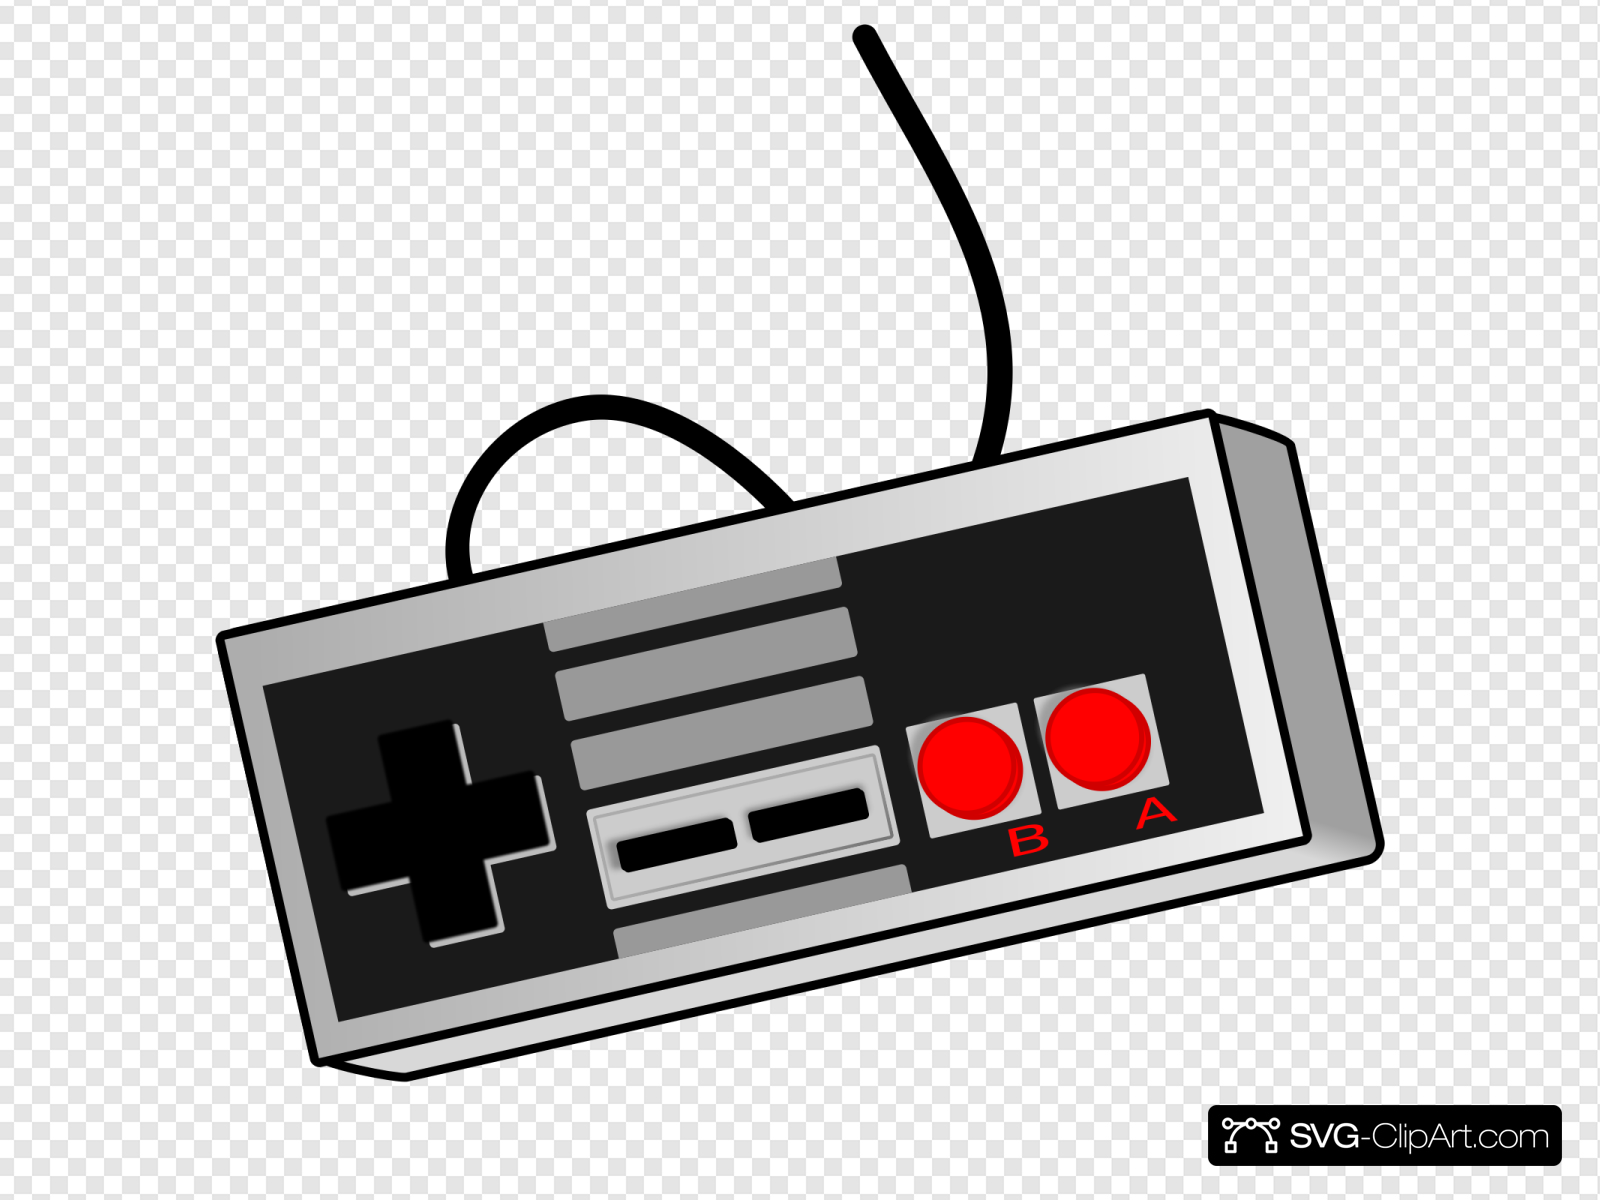 Bhspitmonkey Old School Game Controller Clip art, Icon and